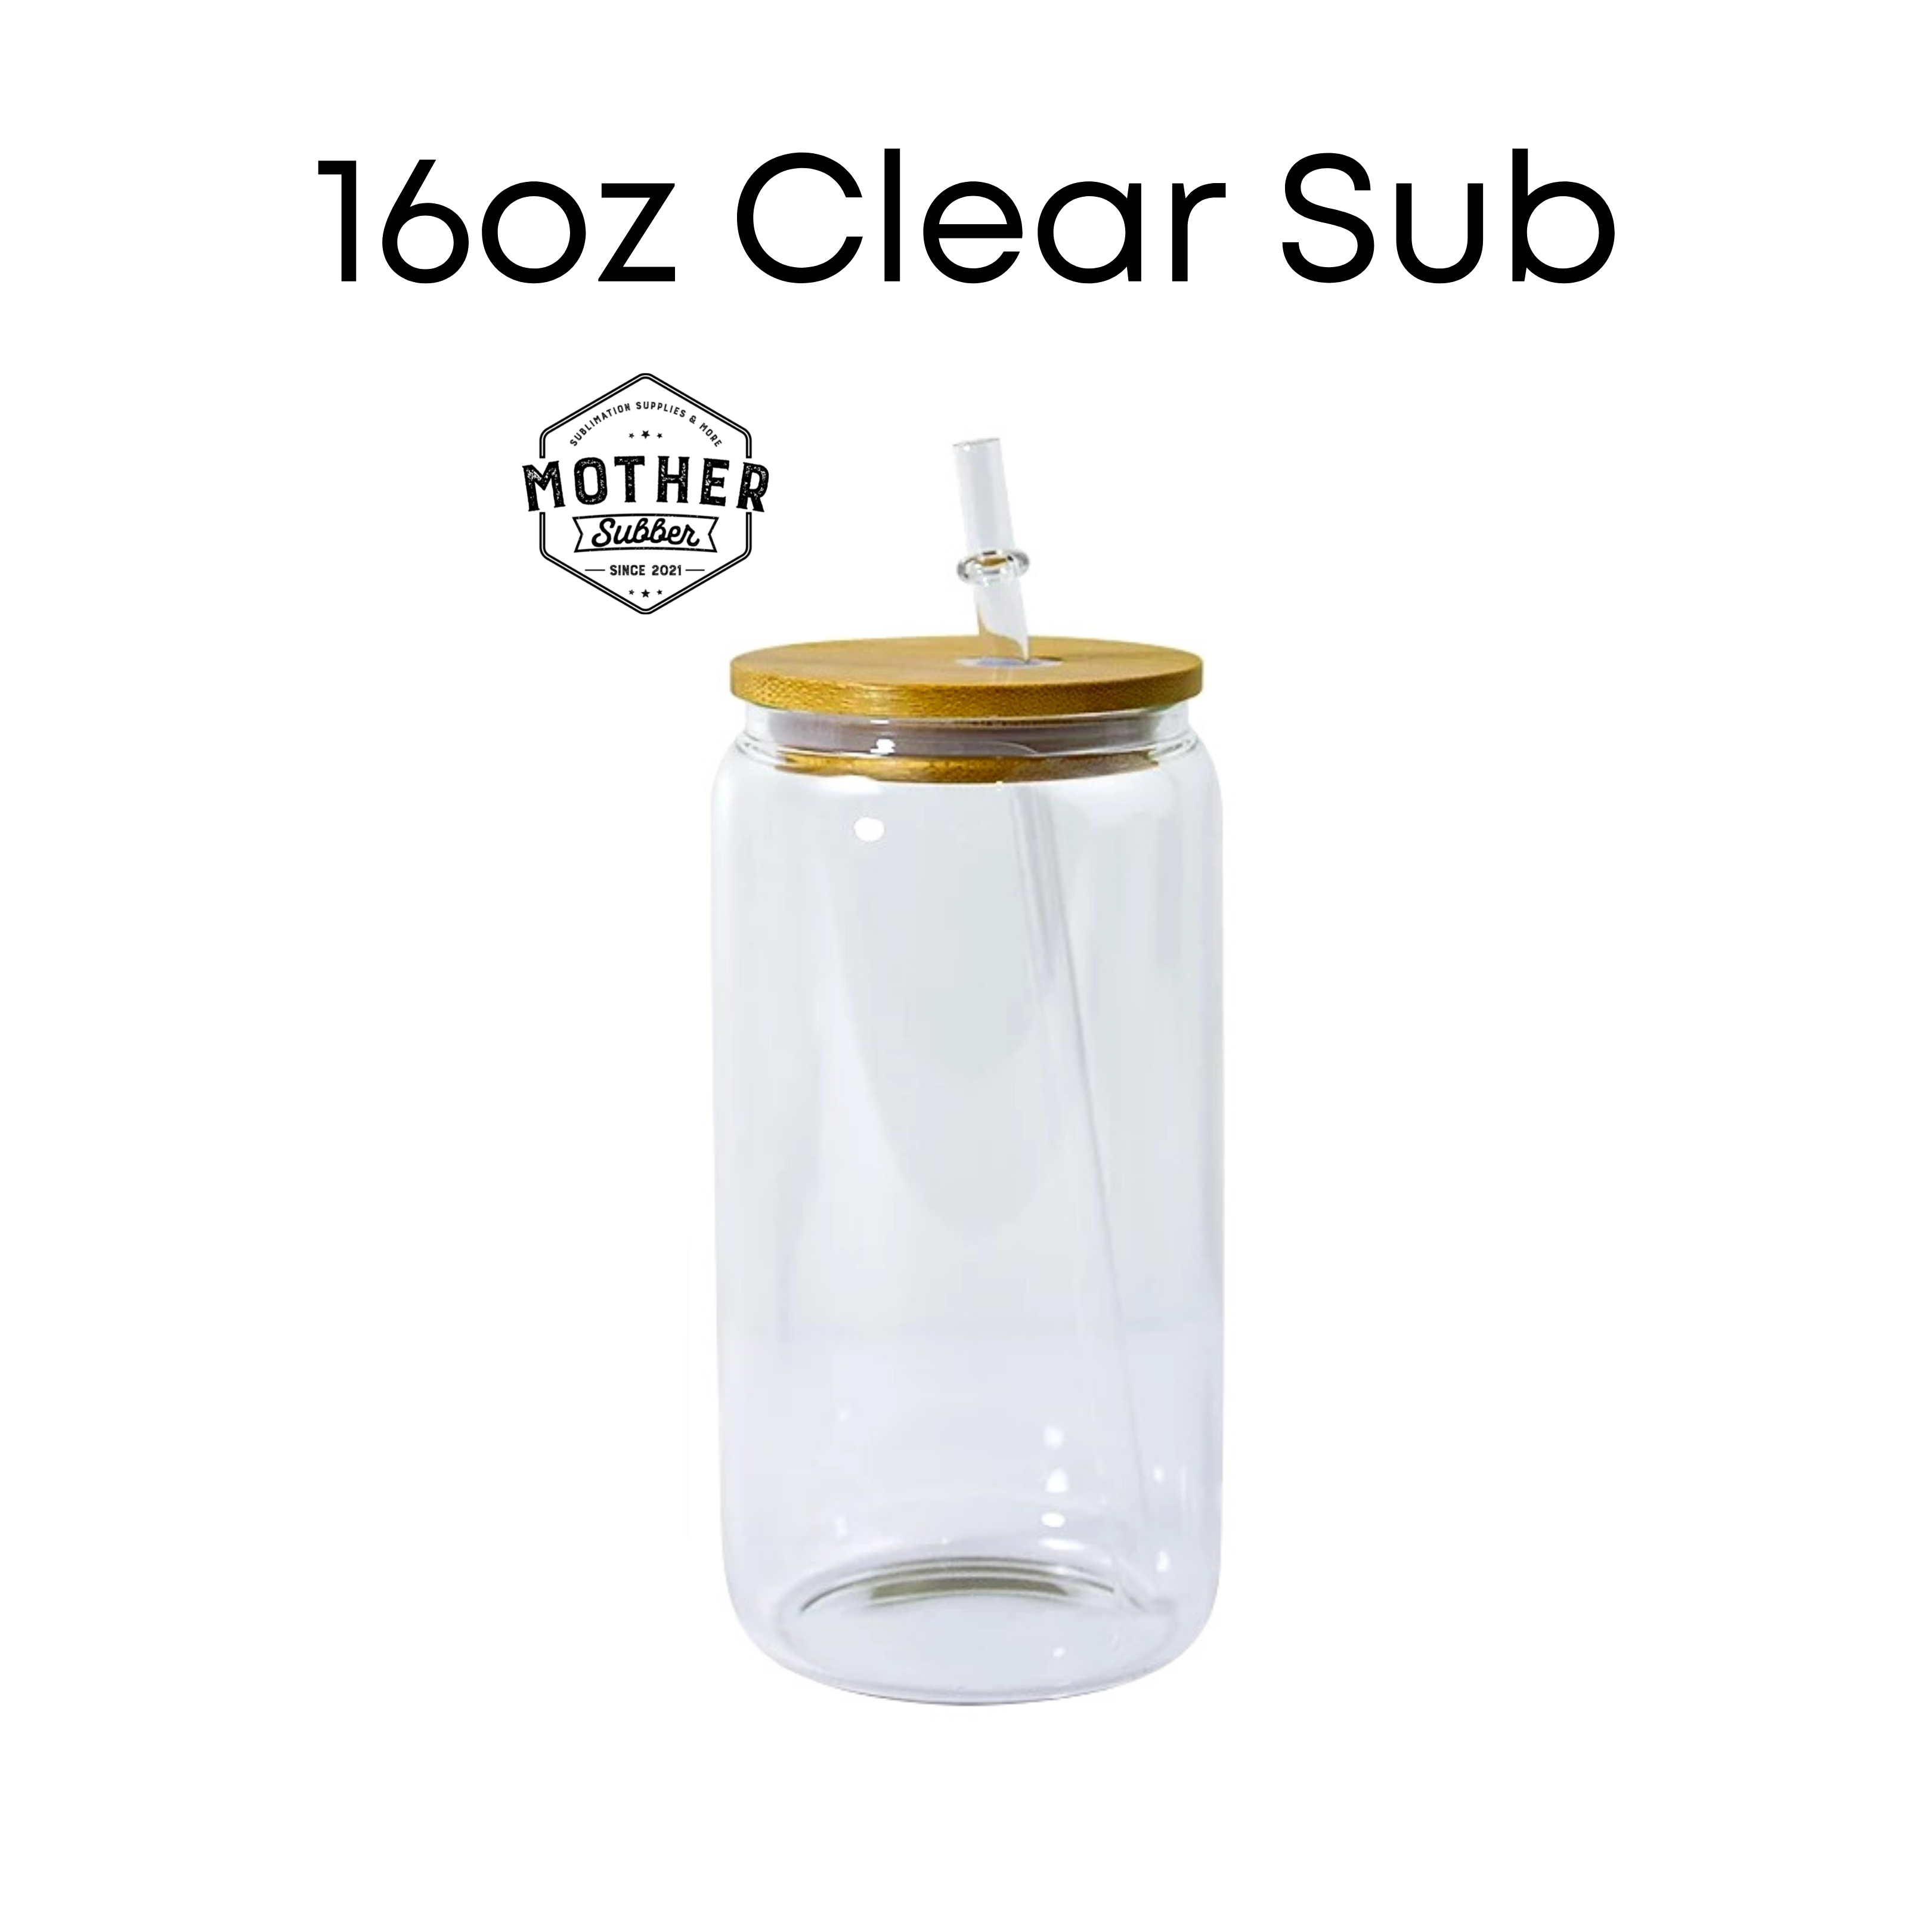 HTVRONT Sublimation Glass Blanks with Bamboo Lid - 16oz Clear Sublimation  Beer Can Glass - Sublimati…See more HTVRONT Sublimation Glass Blanks with